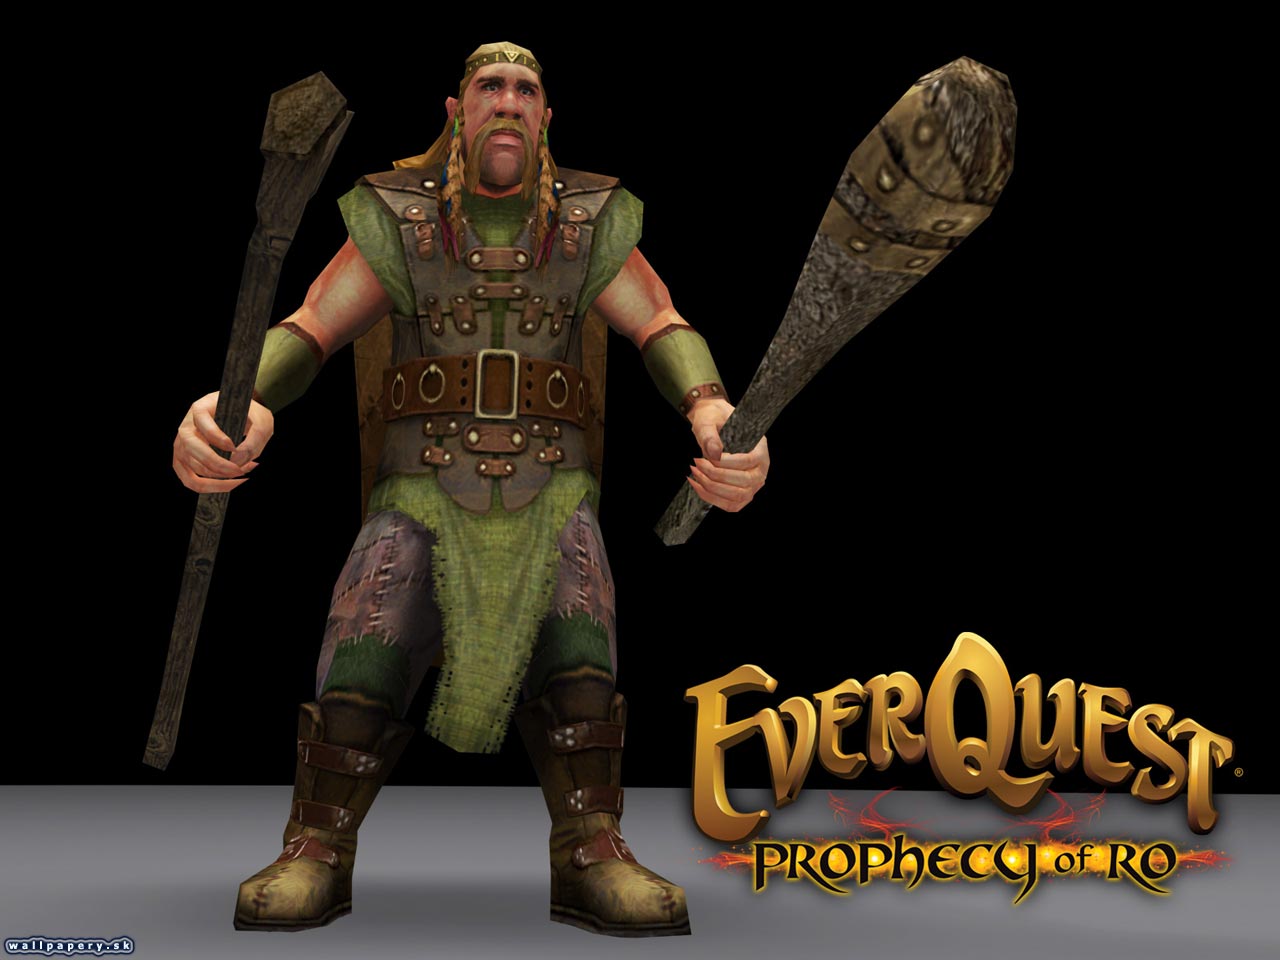 EverQuest: Prophecy of Ro - wallpaper 4